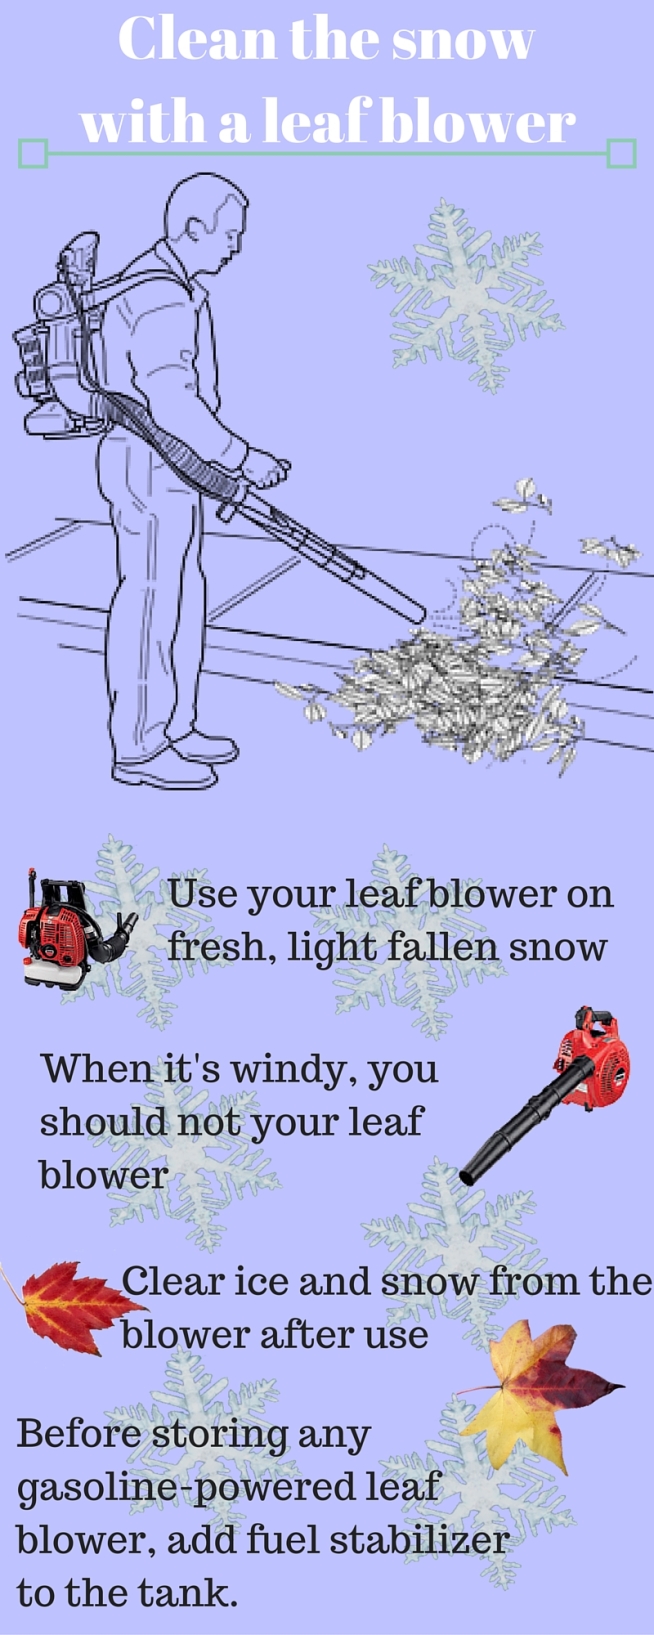 Clean the snow with a leaf blower _ infographic